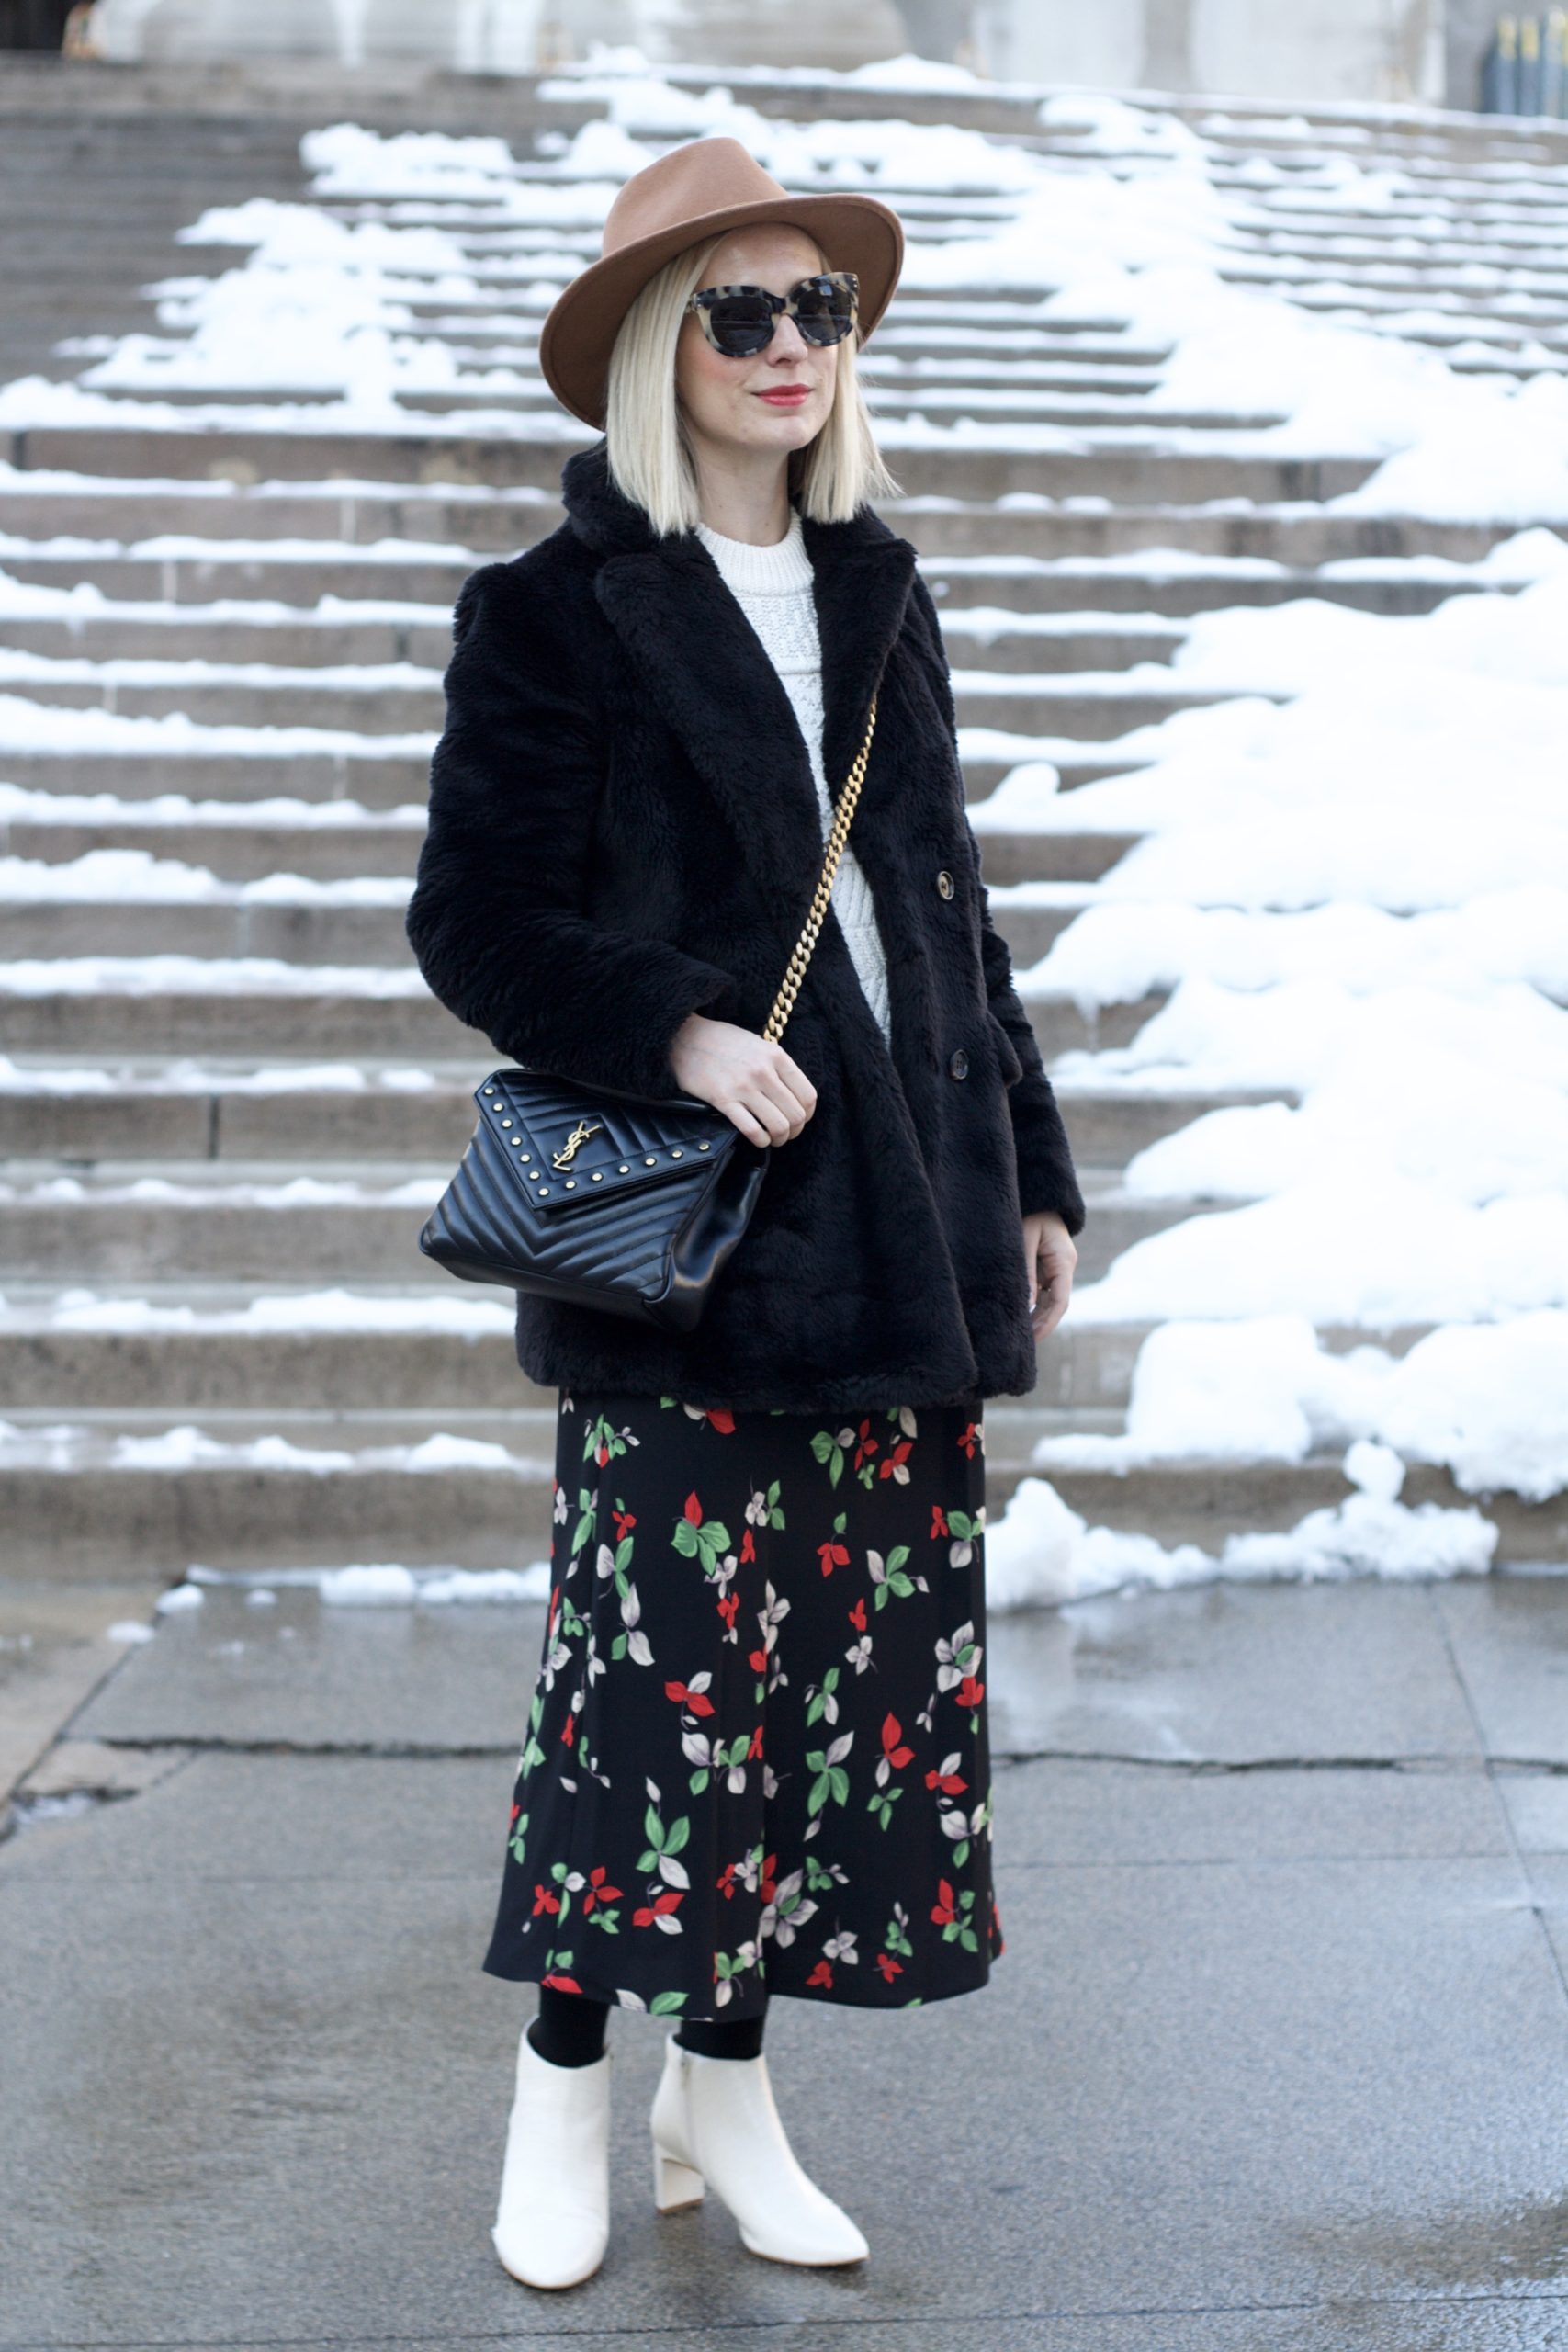 maxi skirt with ankle boots, teddy coat, winter outfit ideas